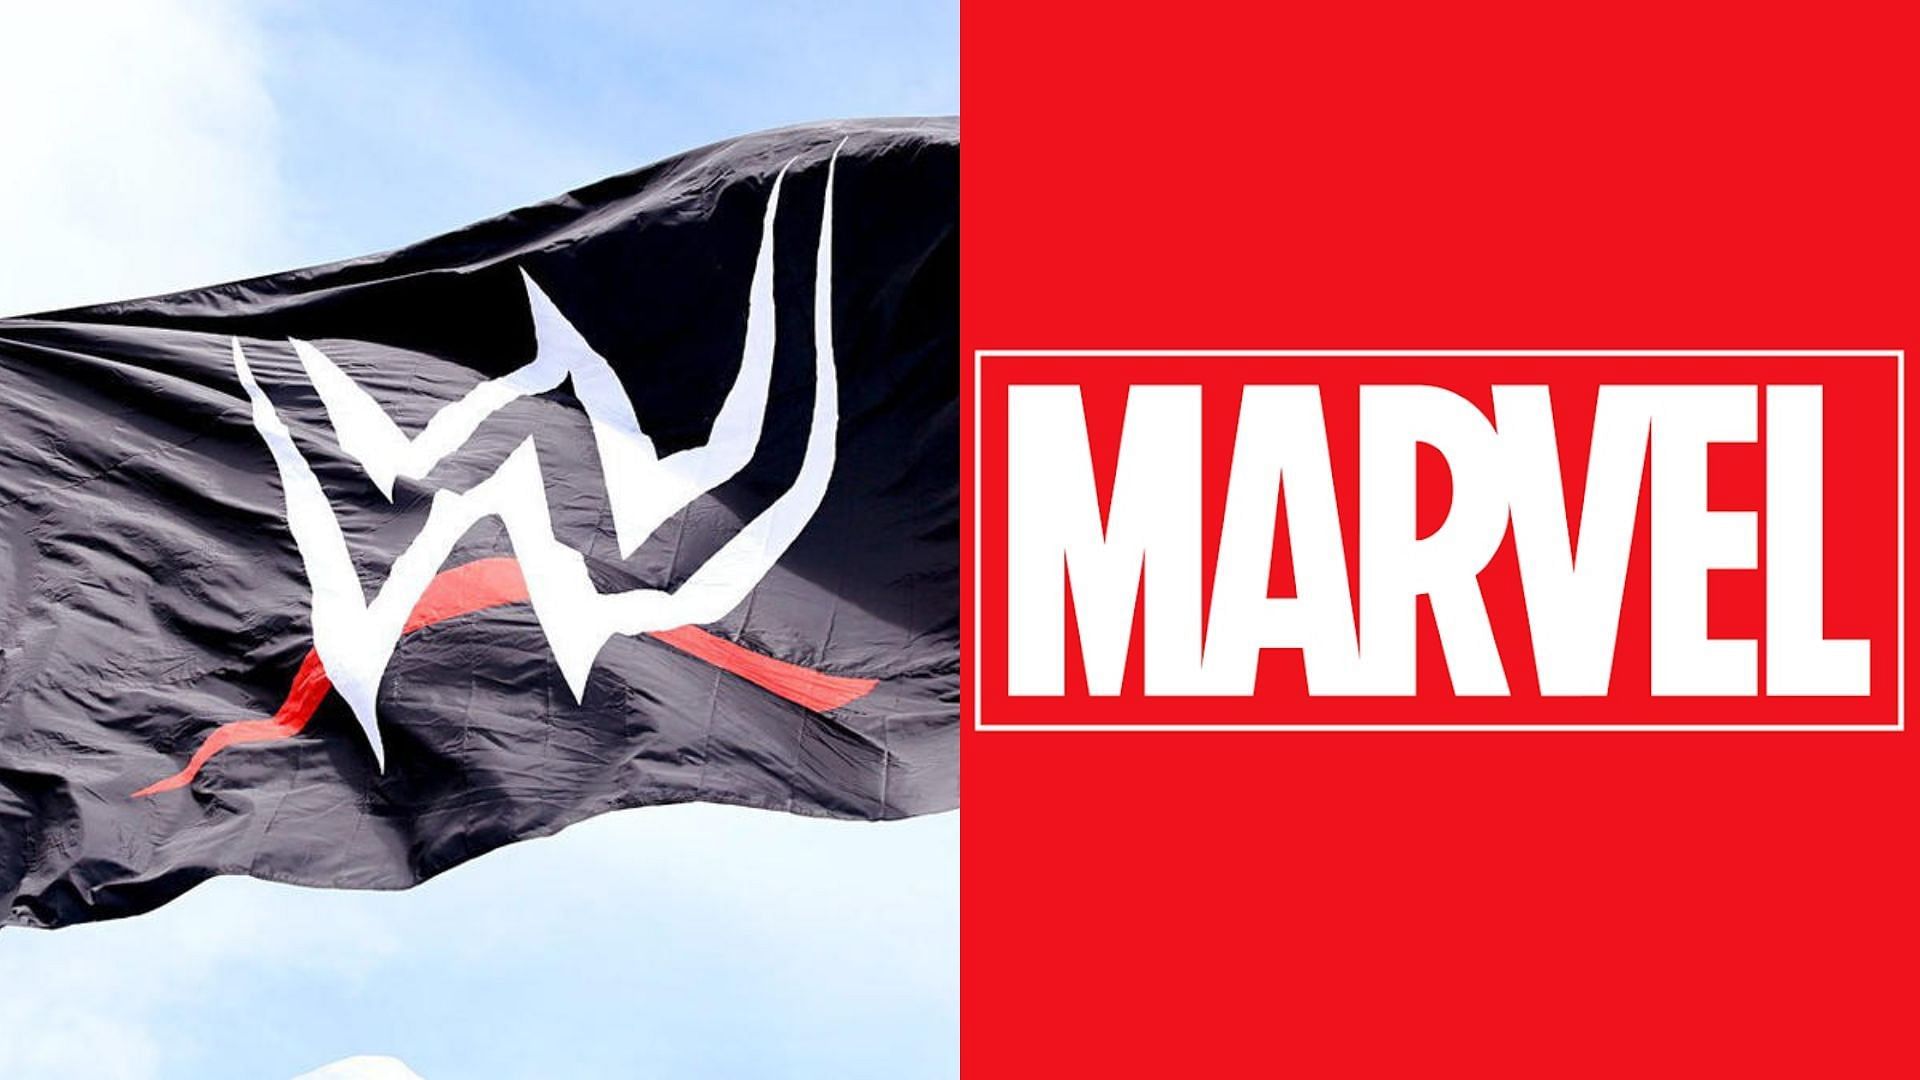 The WWE star is set to appear in a MARVEL movie